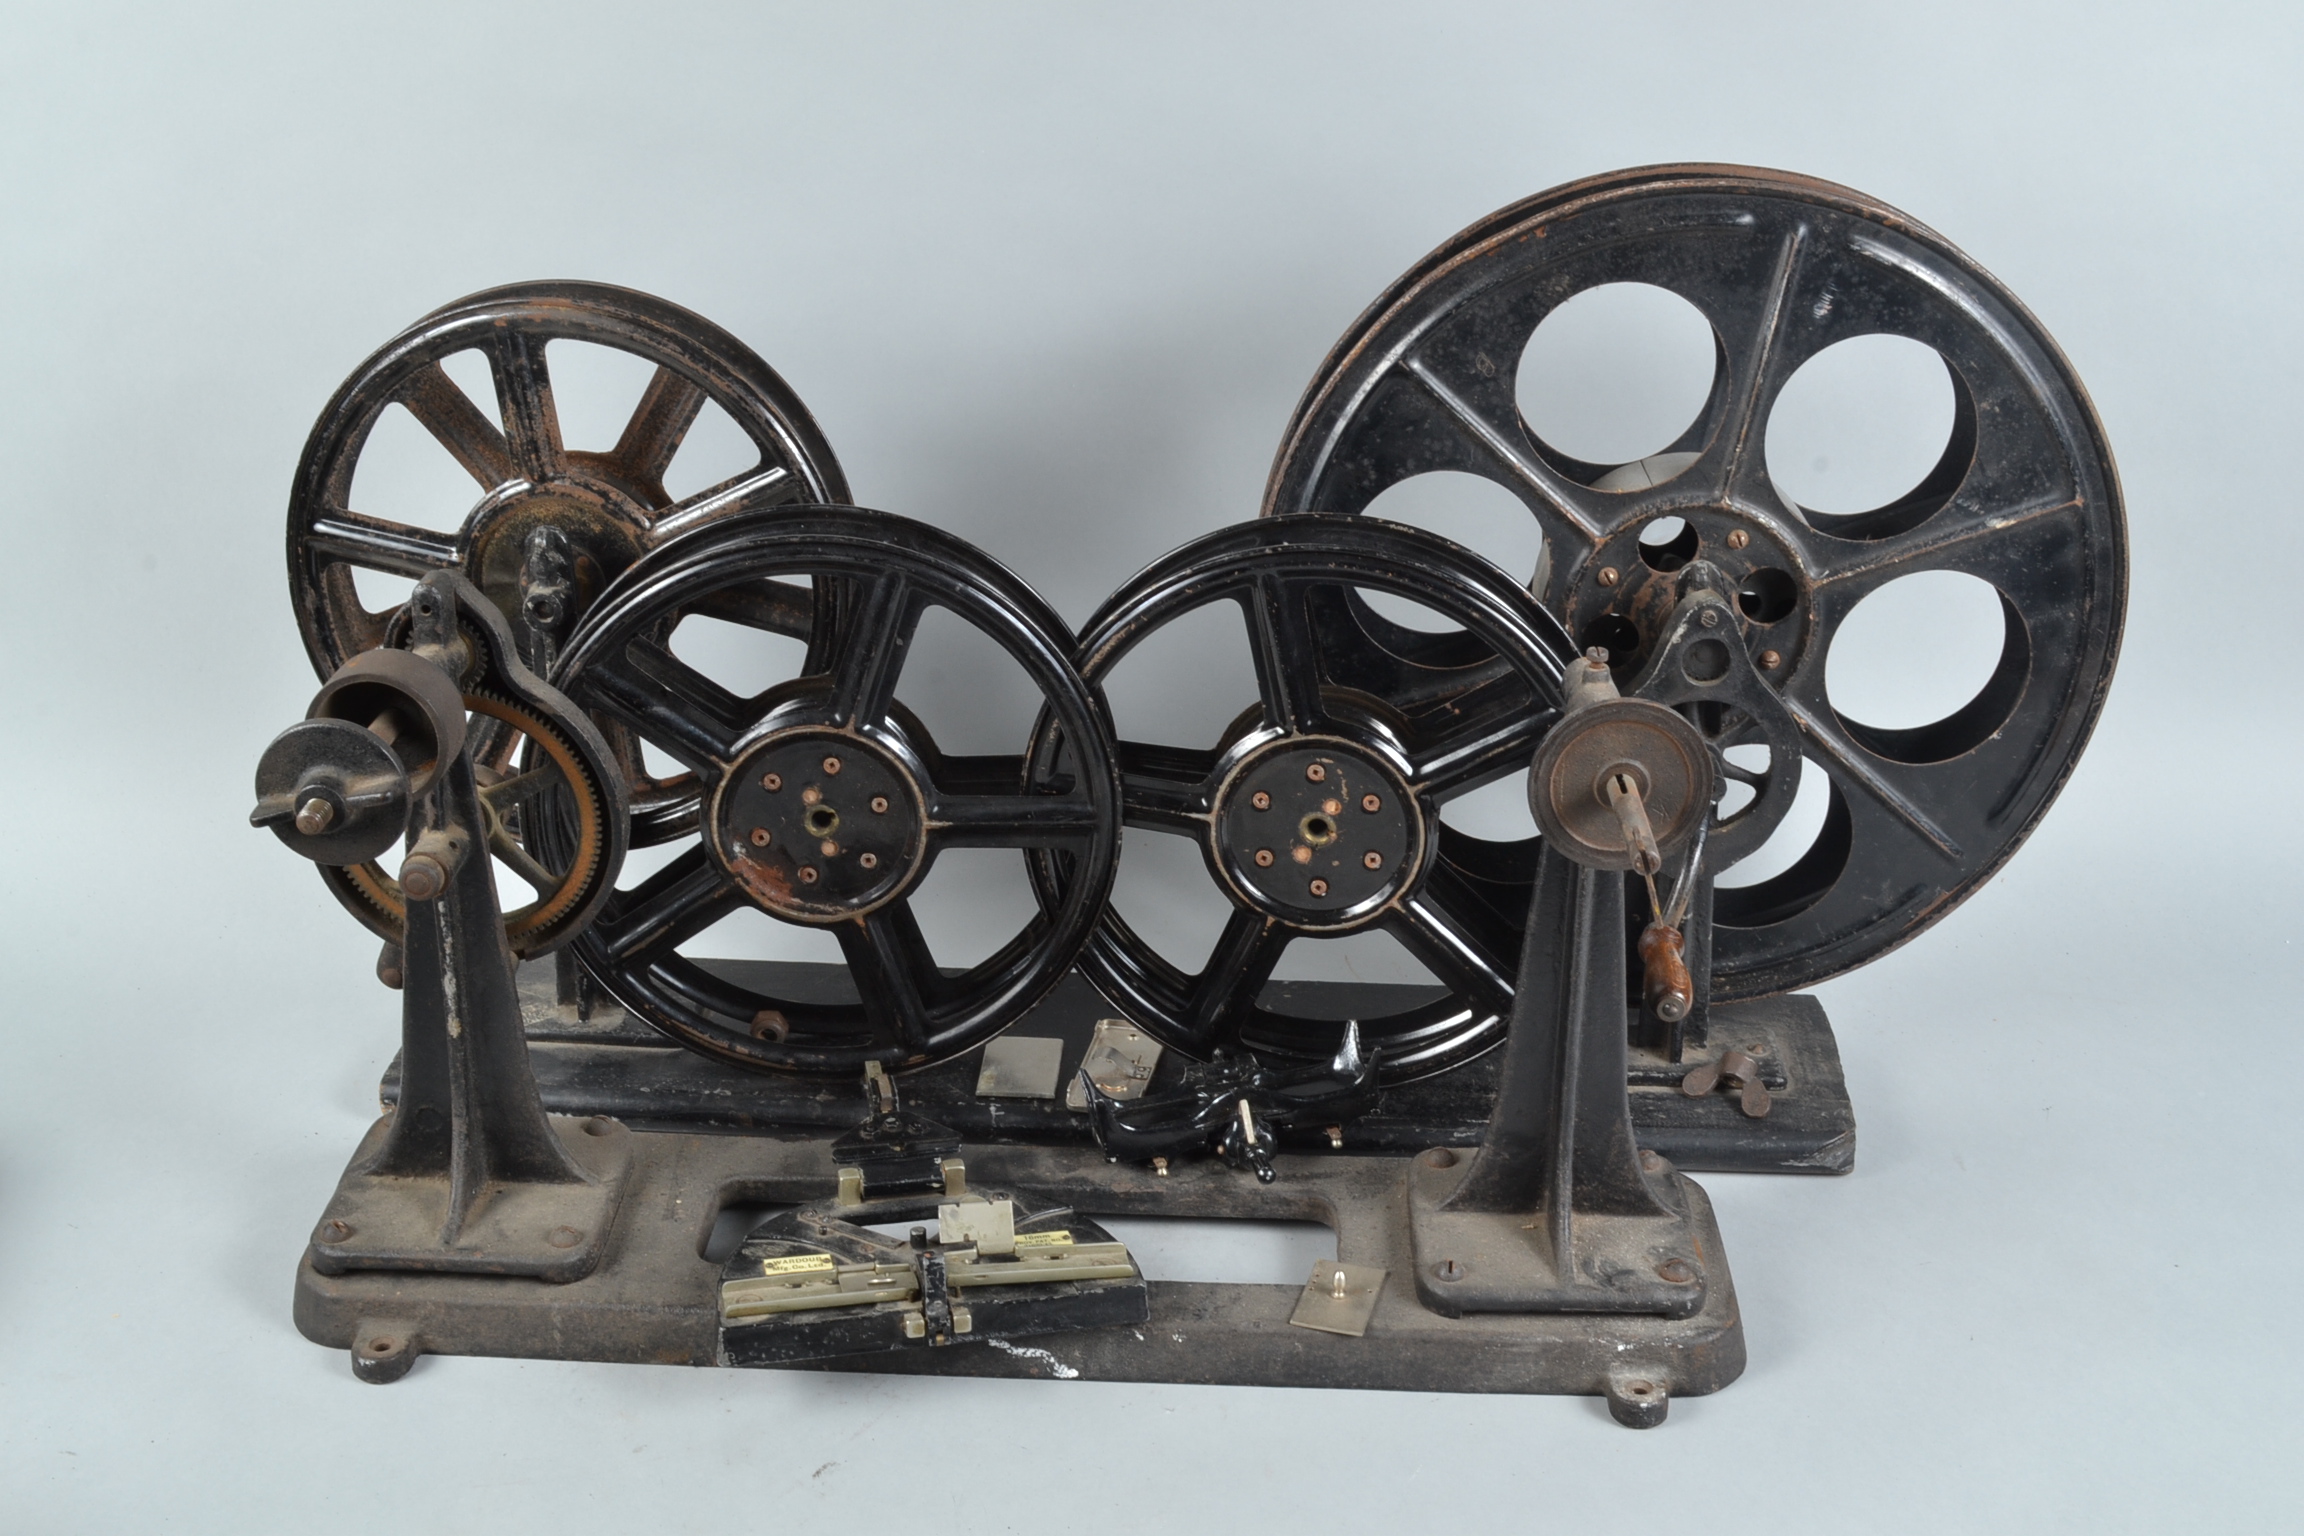 Cinema Projectionist Film Handling Equipment, including two pairs of 35mm film rewinds, mounted on